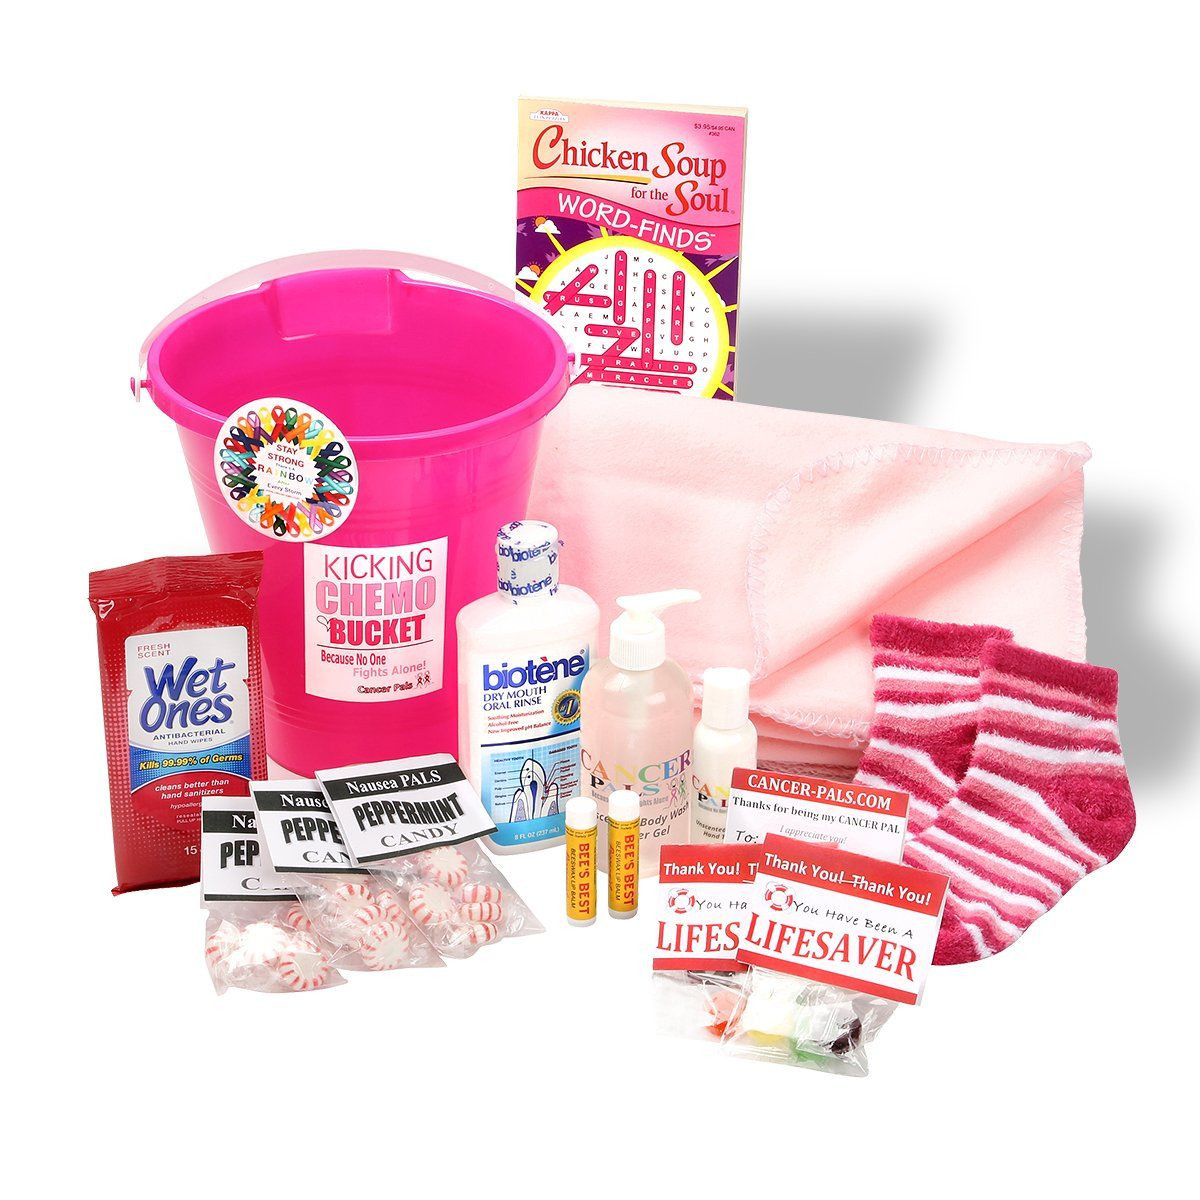 Gift Basket For Cancer Patient Ideas
 The top 22 Ideas About Gift Basket Ideas for Breast Cancer